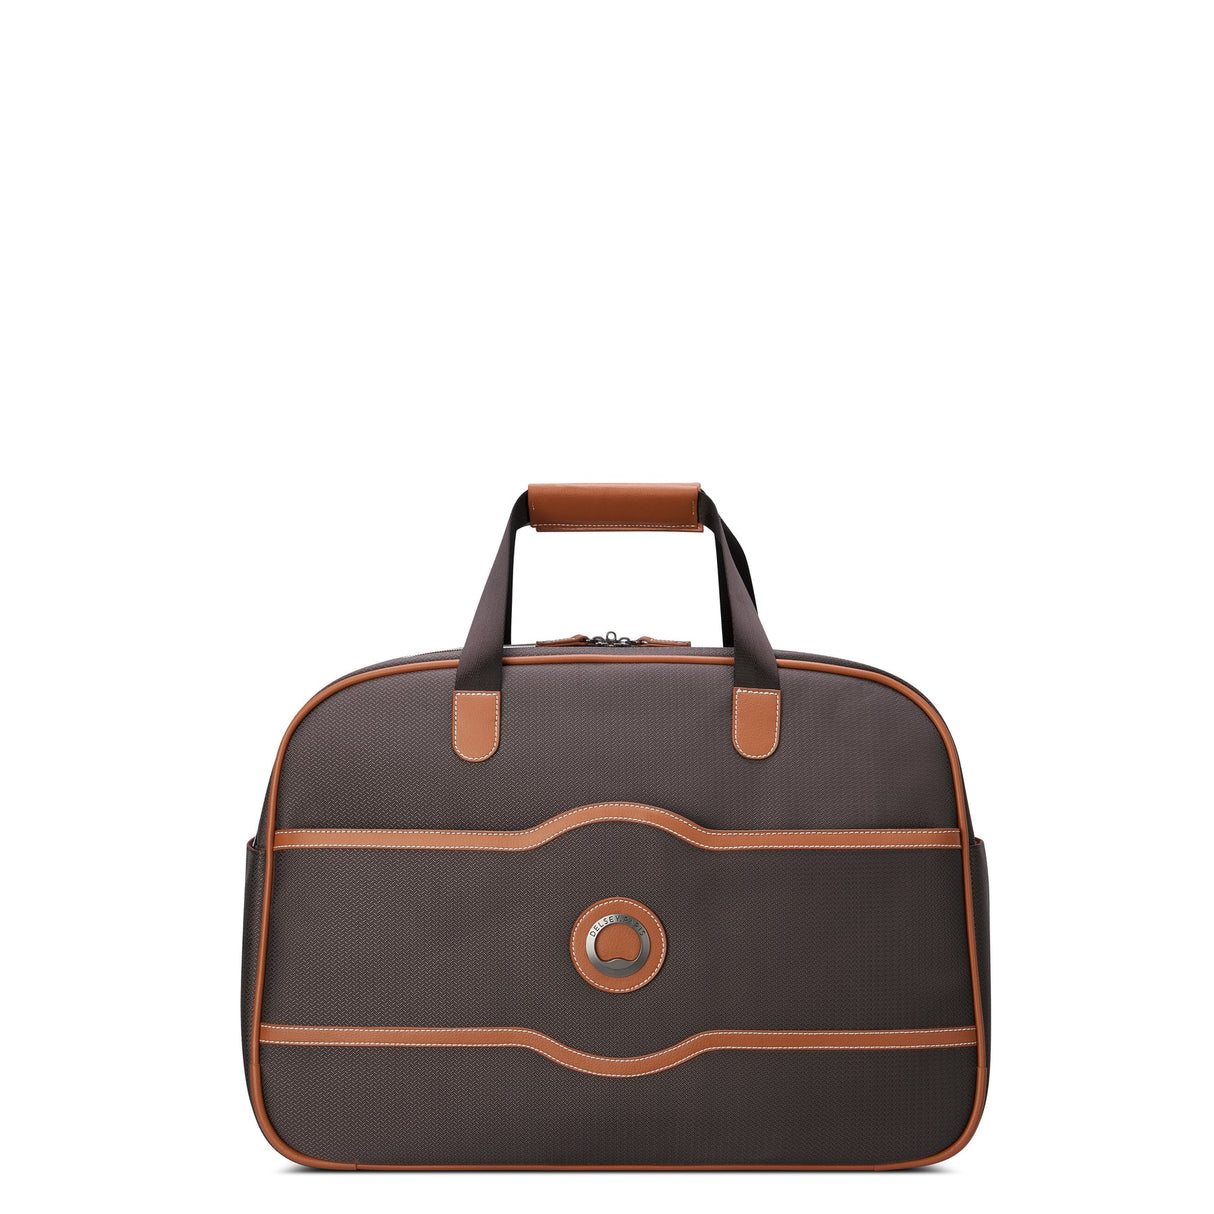 Delsey Chatelet Air 2.0 Carry-On Duffel - With Smart Band , Brown , delsey-chatelet-air-2.0-00167641006-01_1800x1800_19cefd64-3877-43c2-ace4-f9fee8b3c443